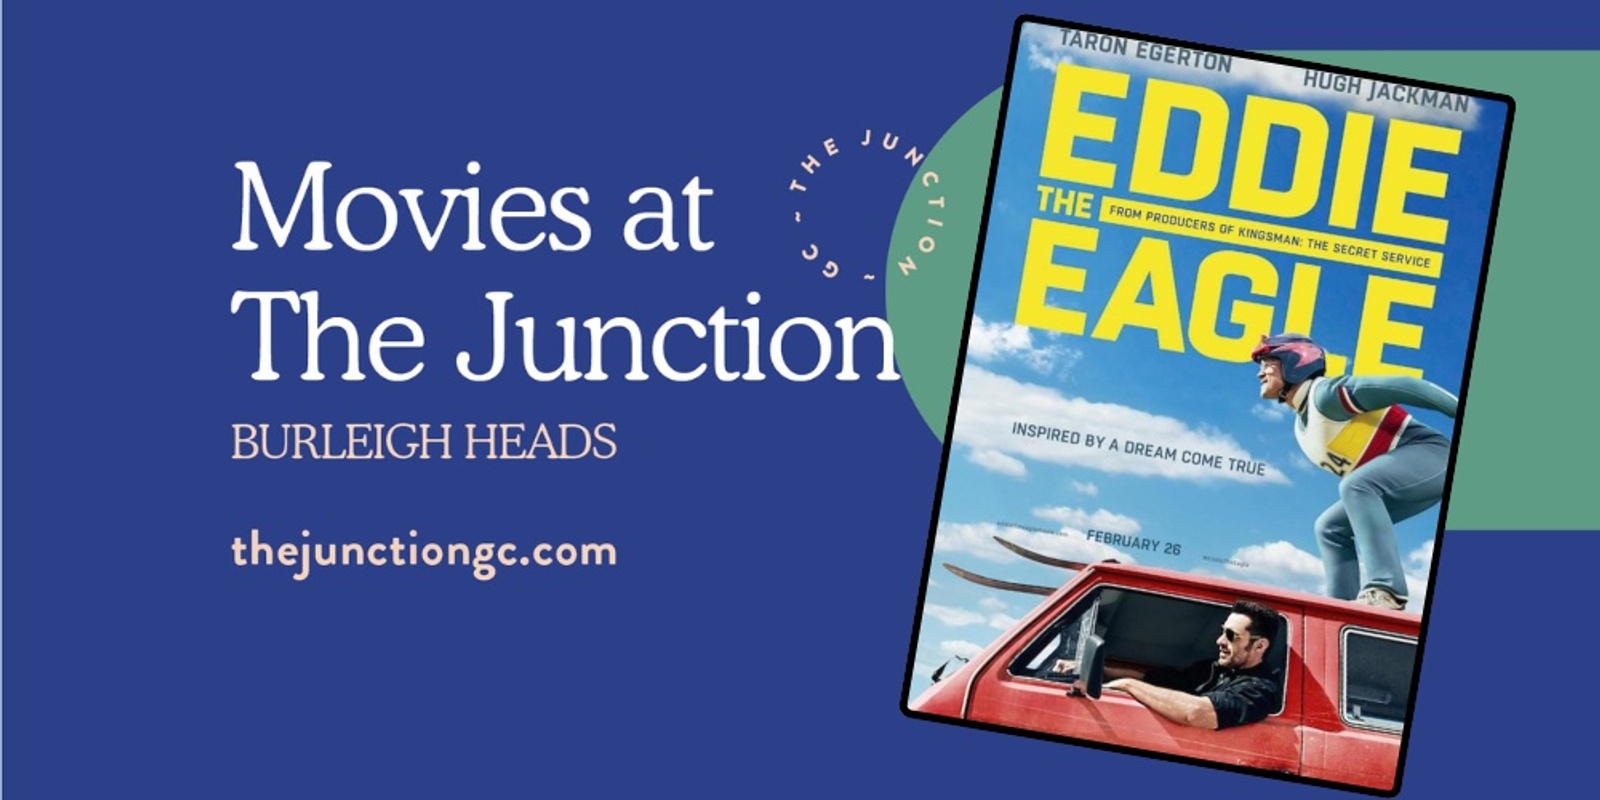 Banner image for FREE Movies at The Junction - EDDIE THE EAGLE (PG)